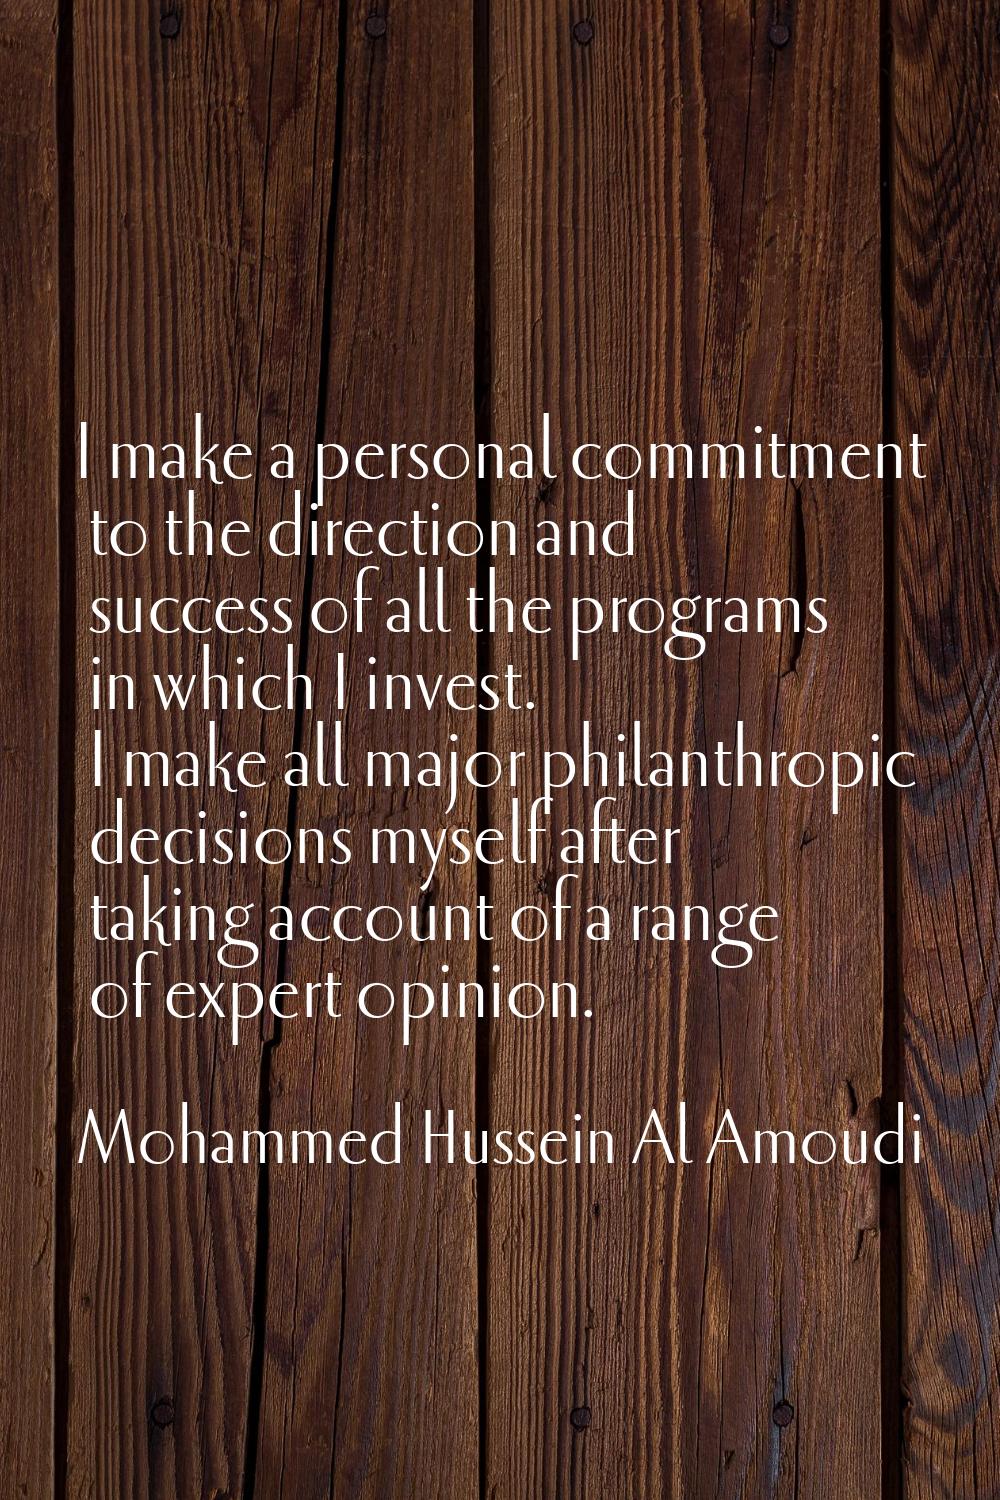 I make a personal commitment to the direction and success of all the programs in which I invest. I 